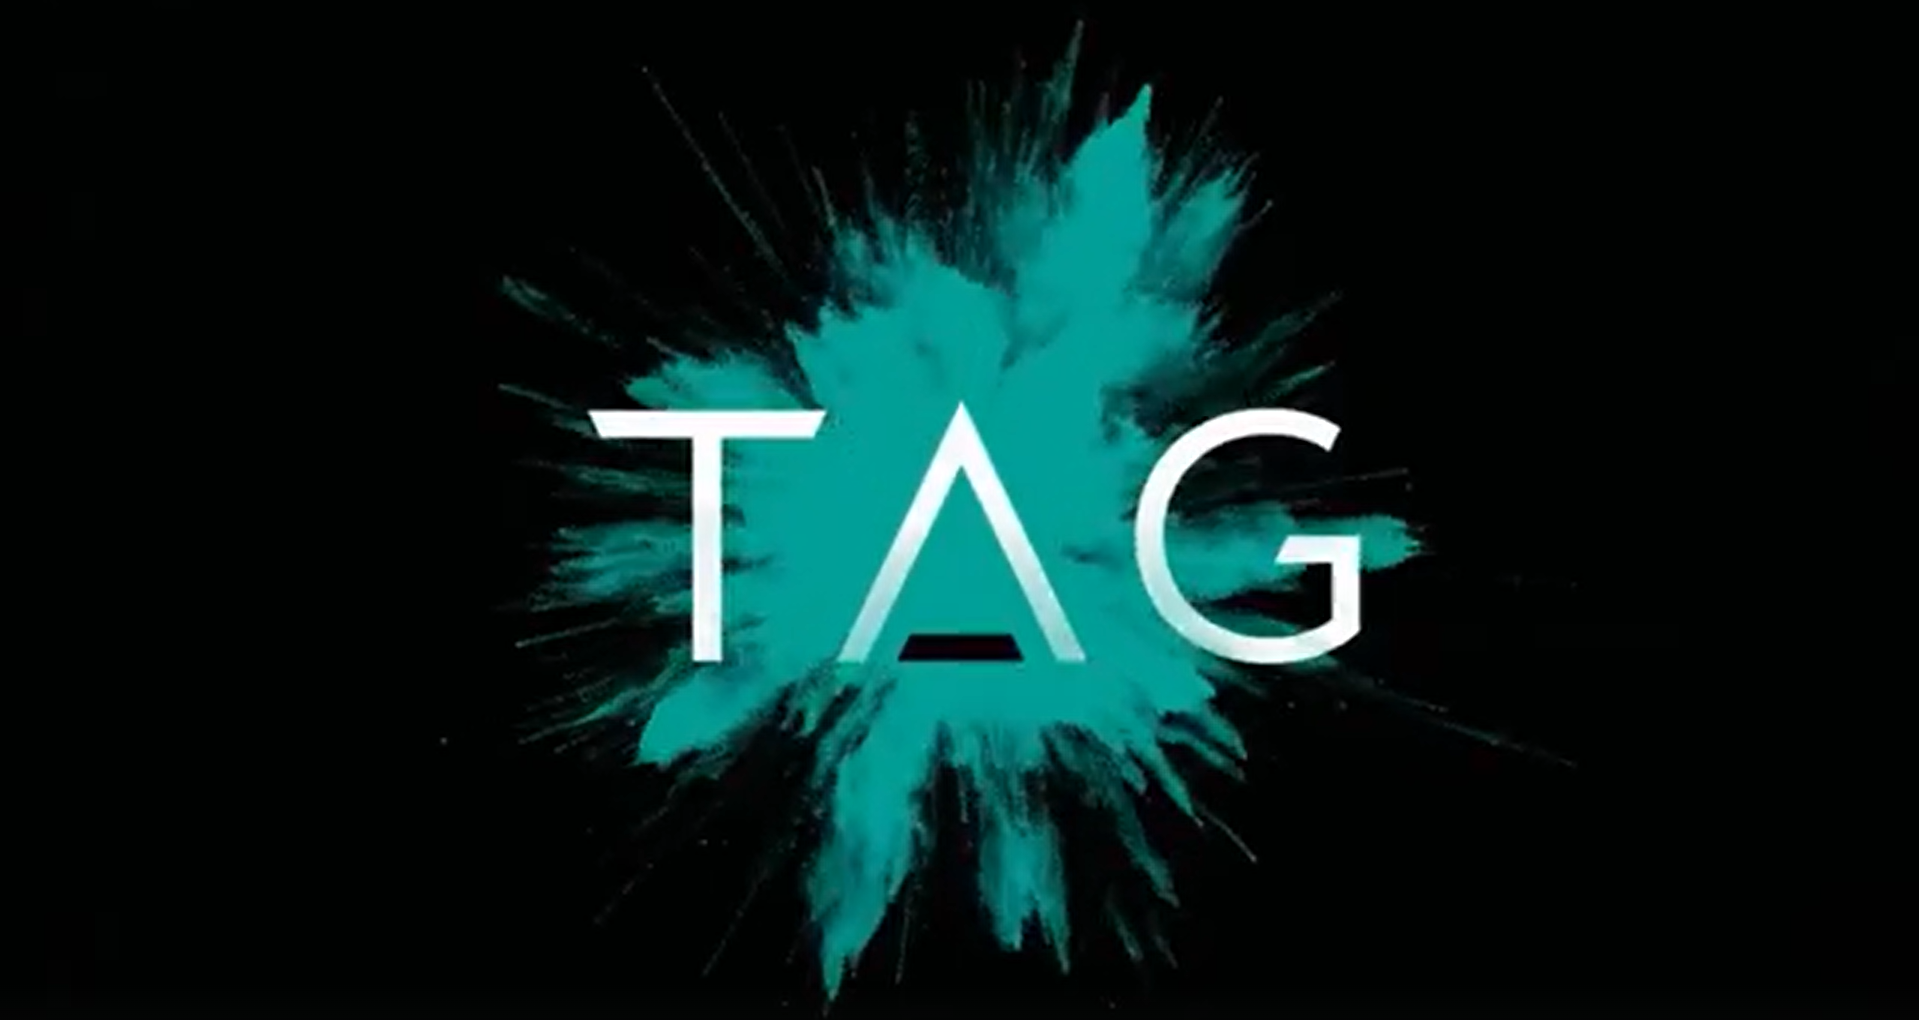 Welcome to TAG